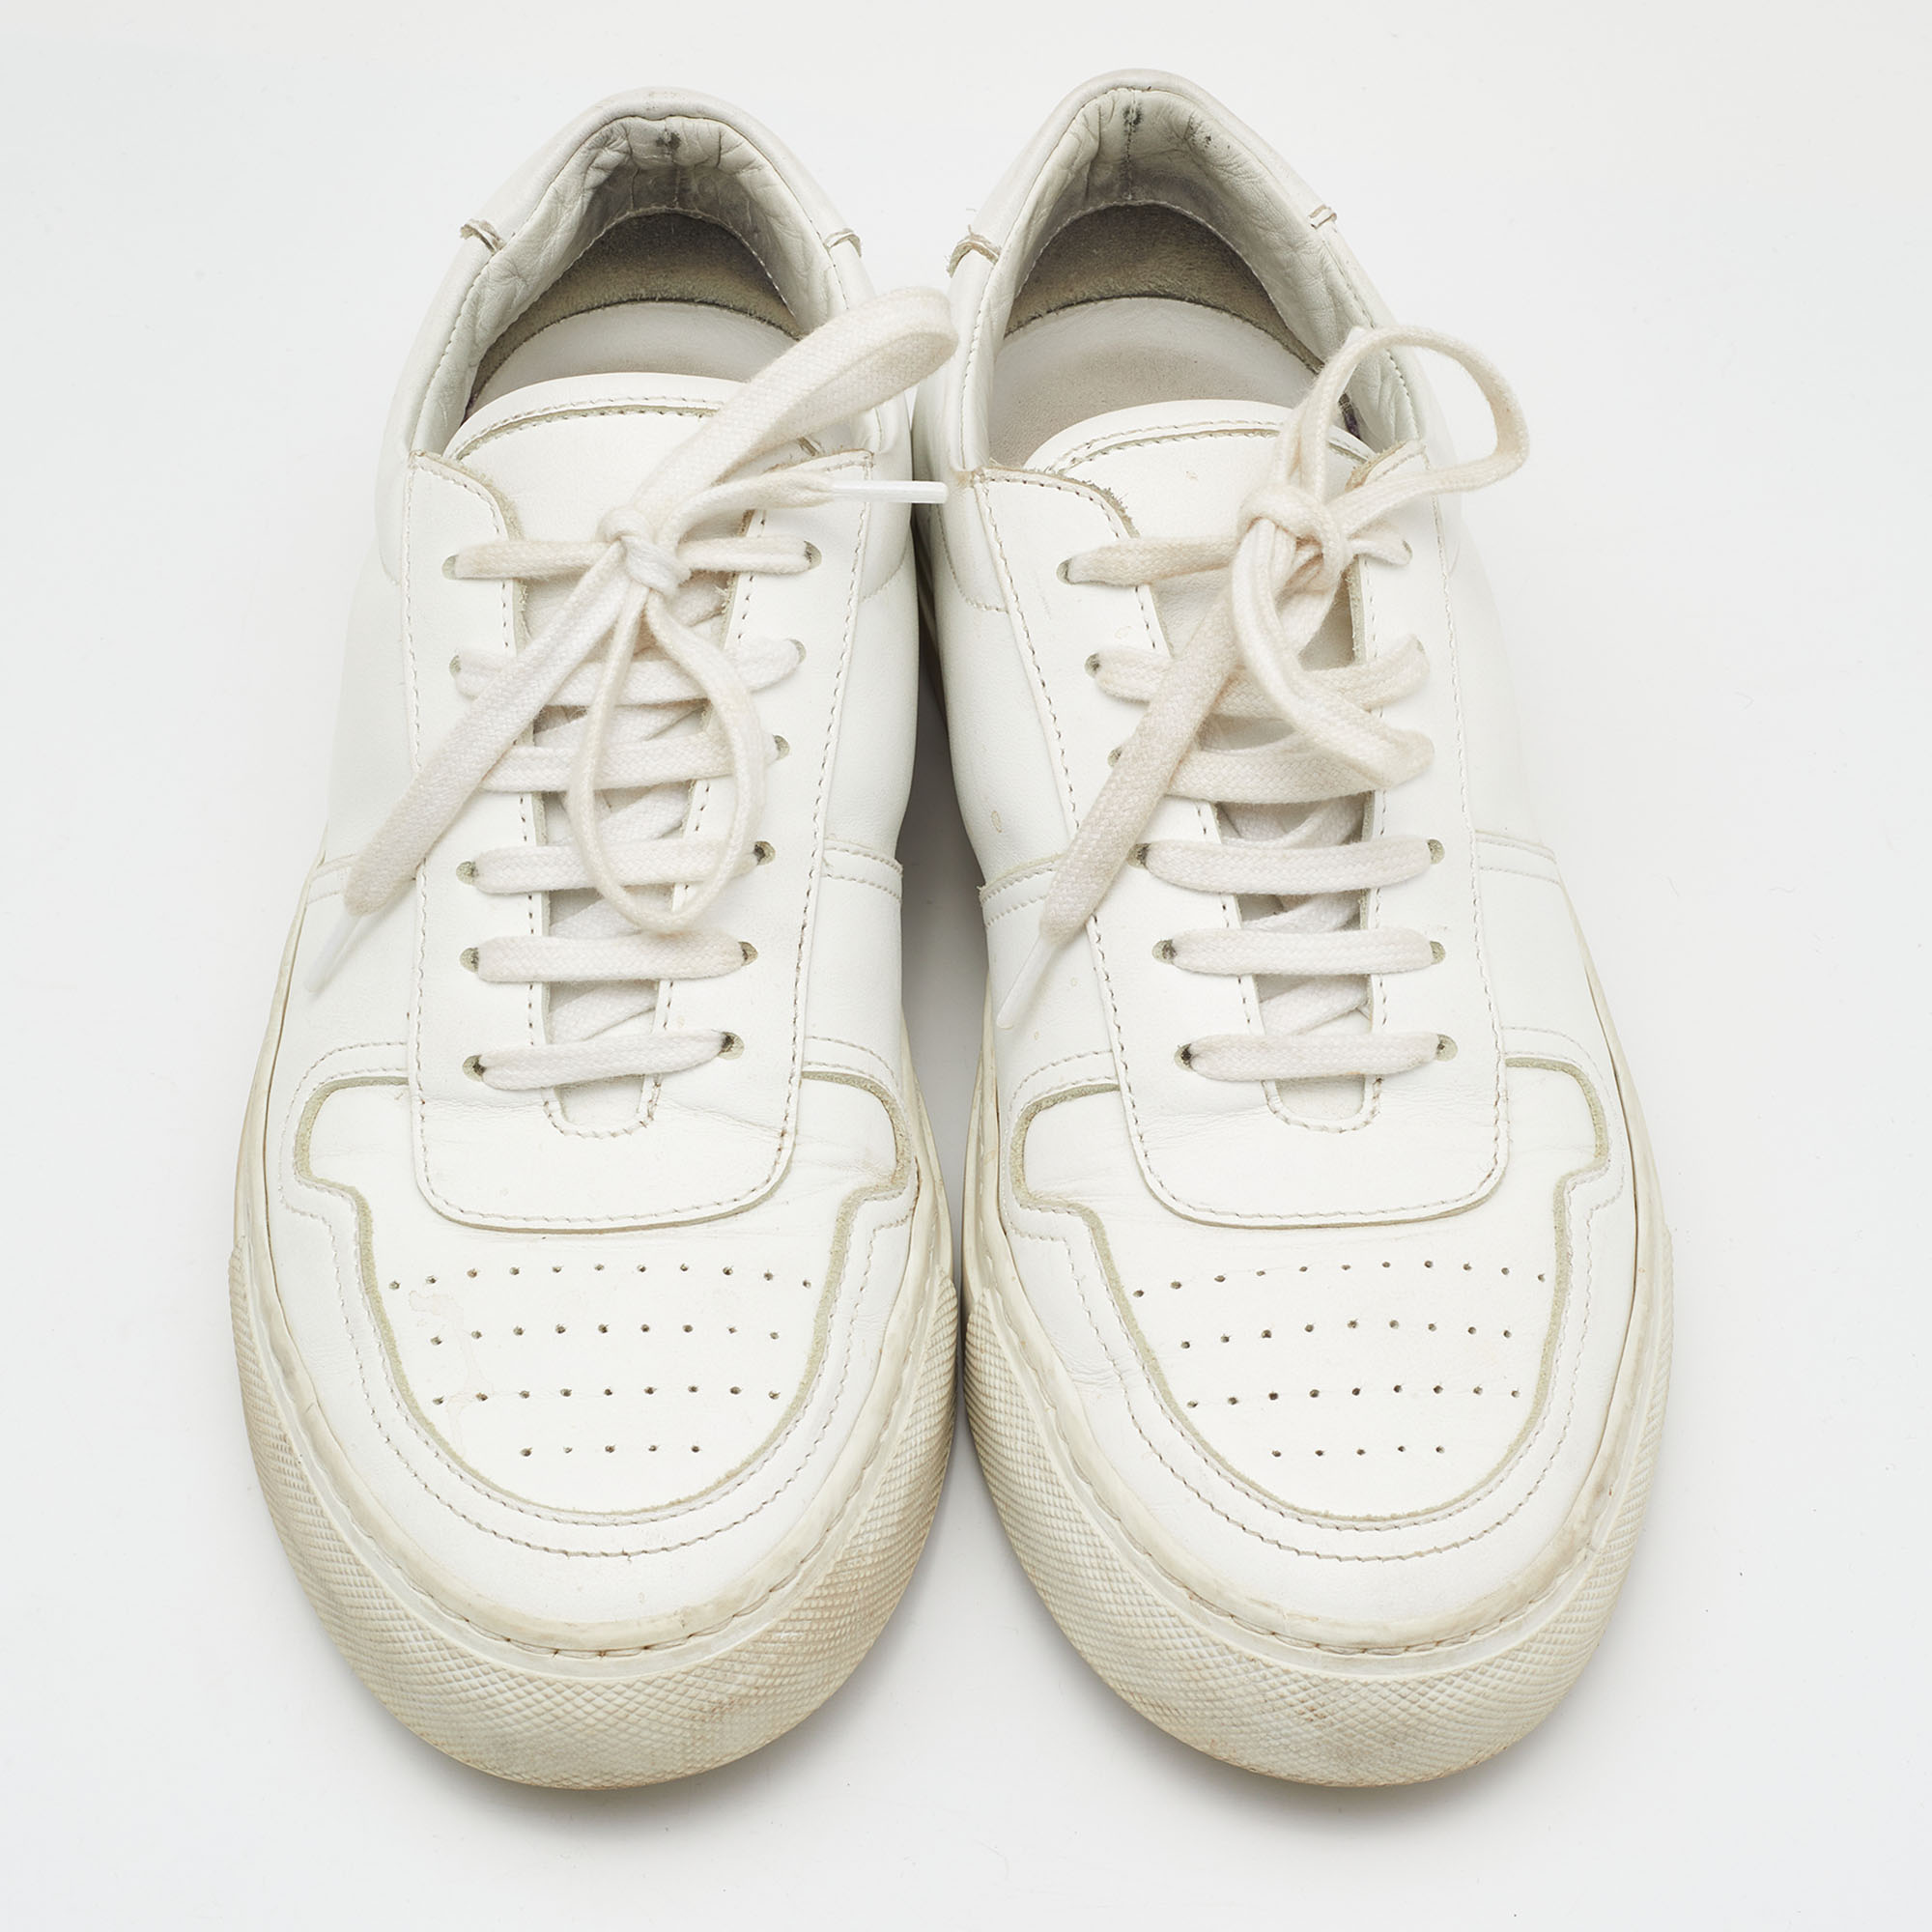 Common Projects White Leather Achilles Low Top Sneakers Size 38